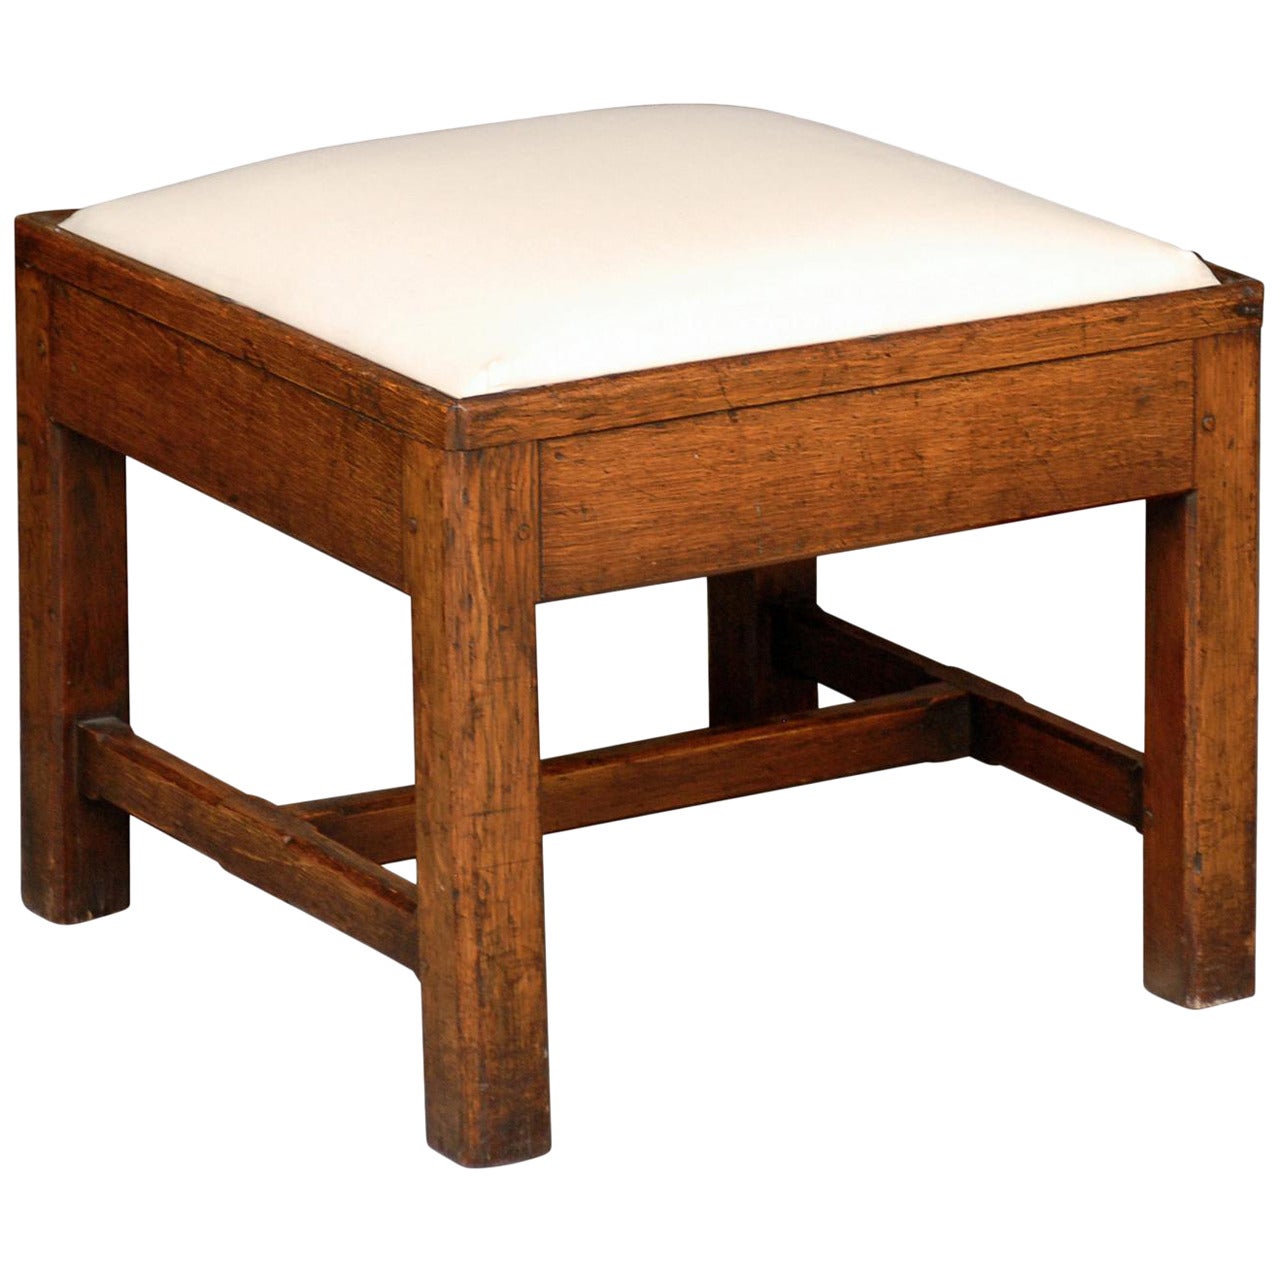 English Late 19th Century Oak Square Stool with Upholstered Seat